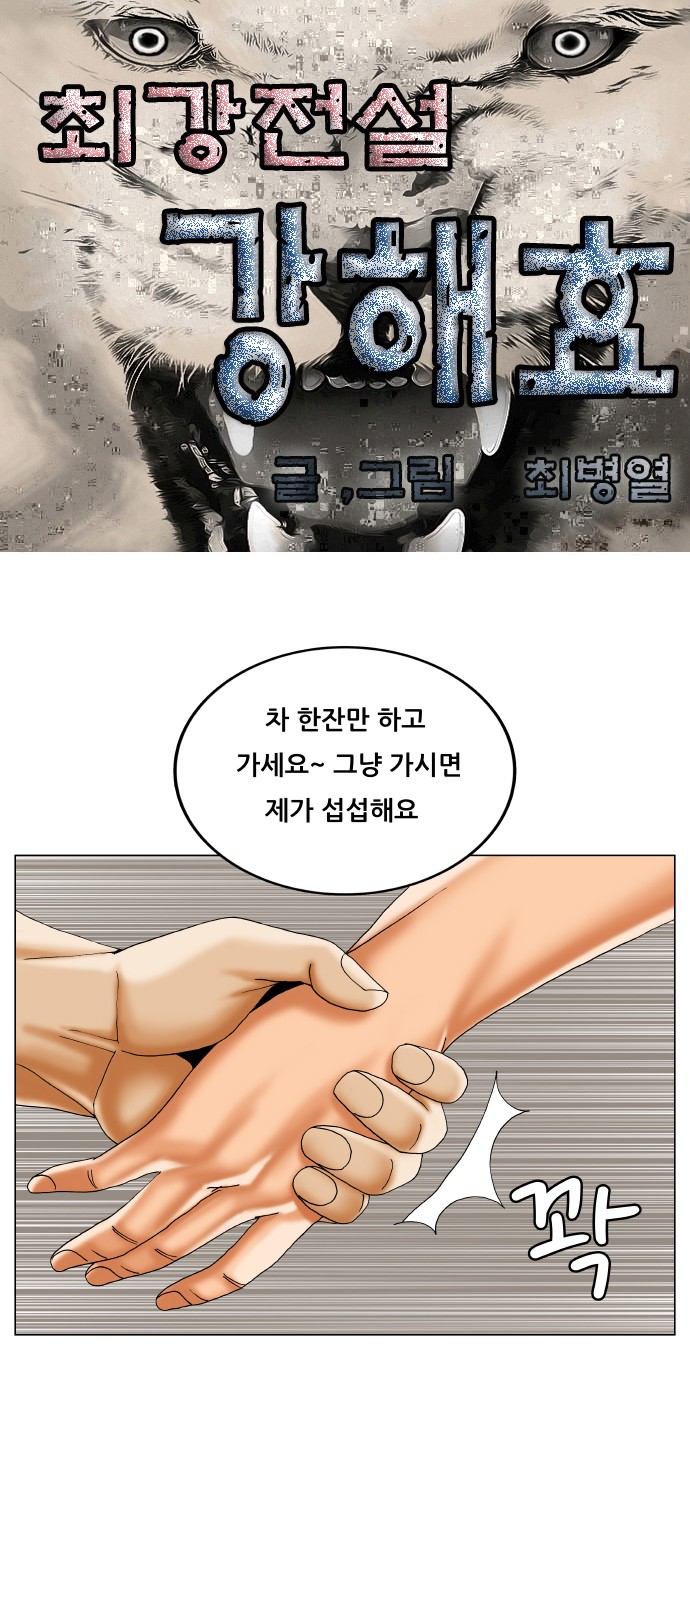 Ultimate Legend - Kang Hae Hyo - Chapter 346 - Page 1